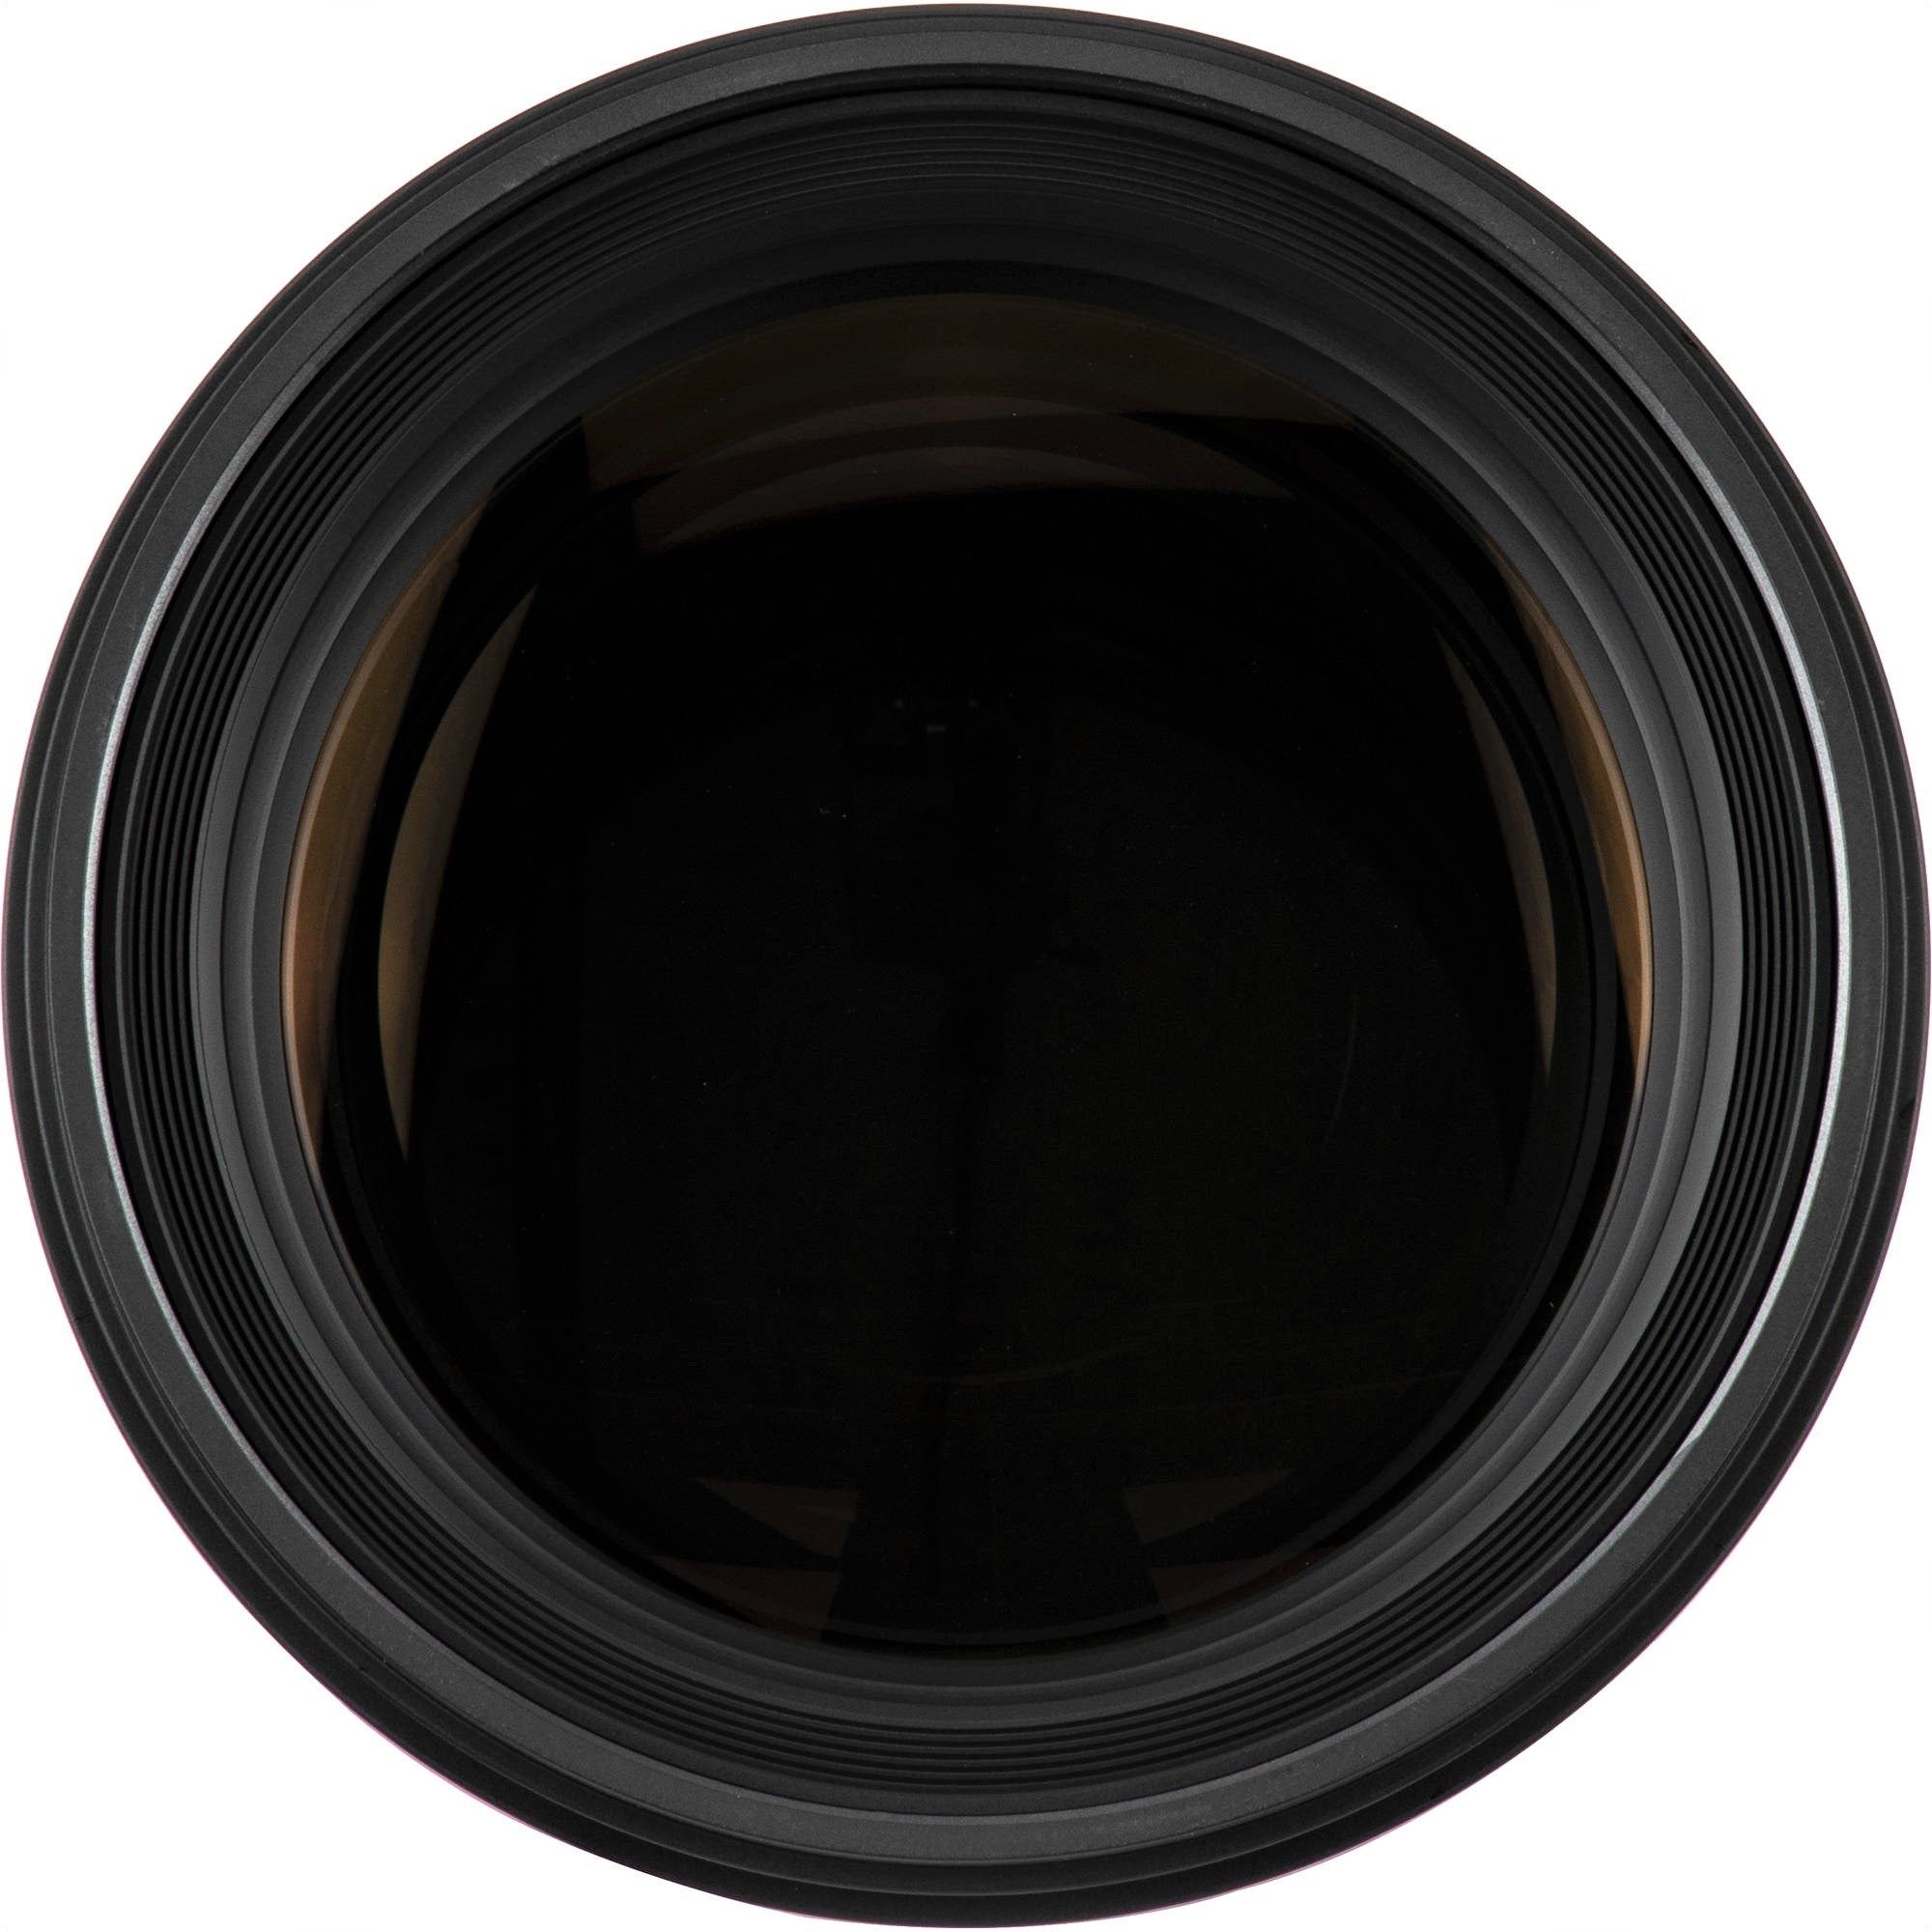 Sigma 105mm F1.4 DG HSM Art Lens for Sigma SA in a Front Close-Up View